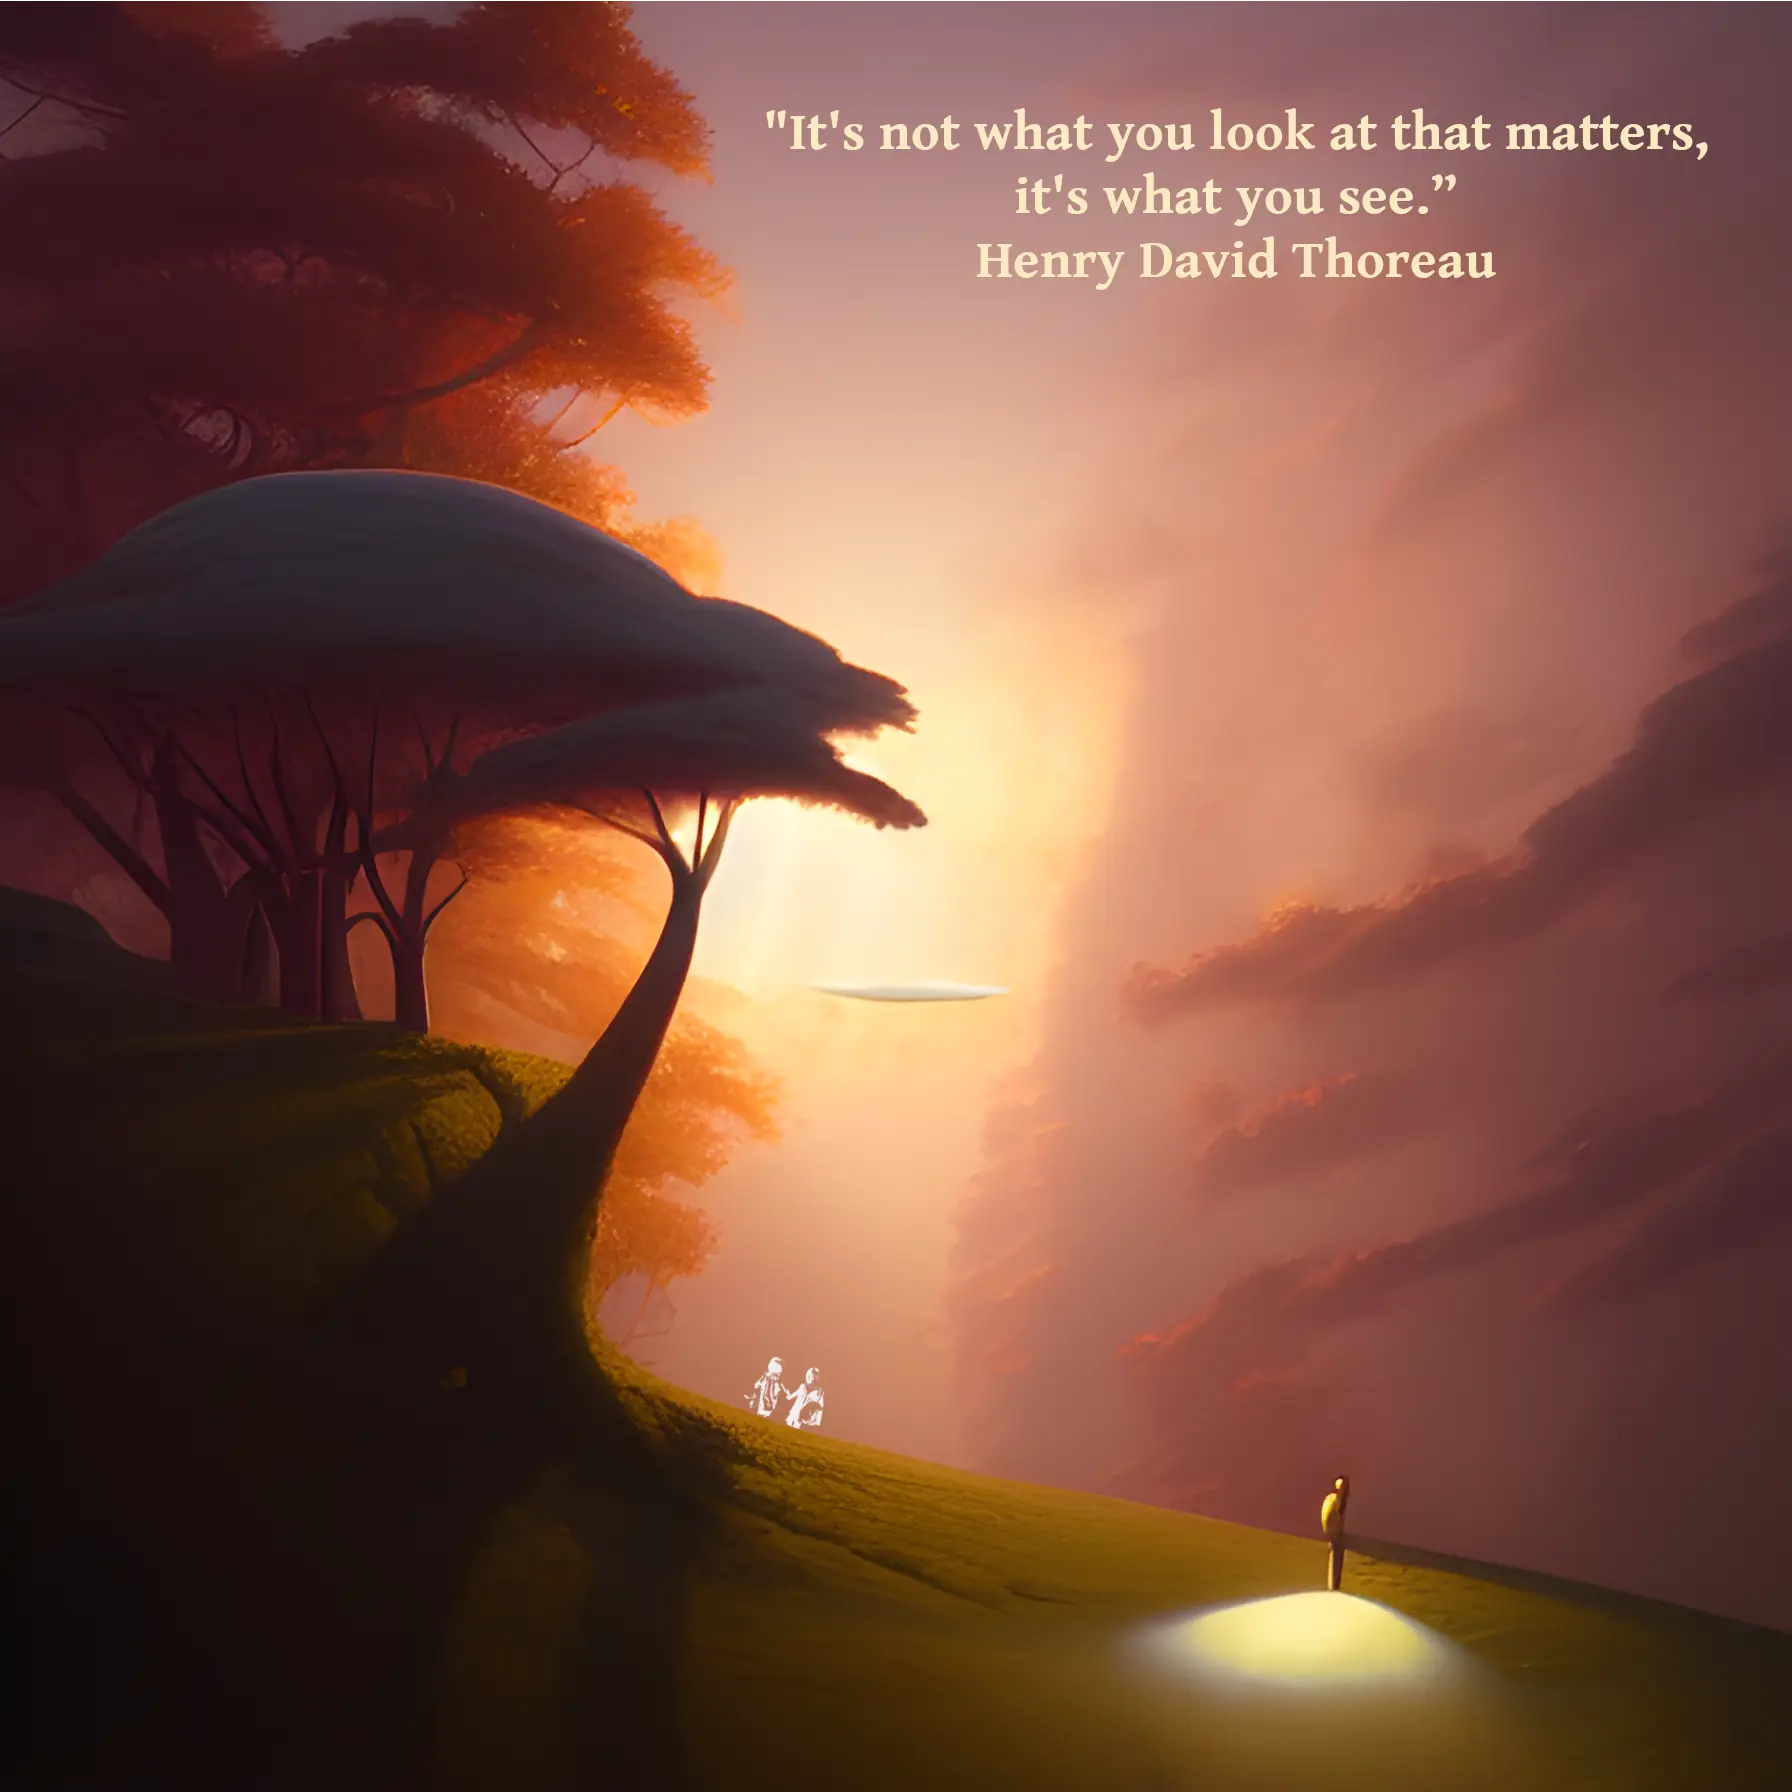 A small figure is bathed in light on a hillside. Above the figure in the sky hovers a disc. The quote by Thoreau reads: "It's not what you look at that matters, it's what you see.”